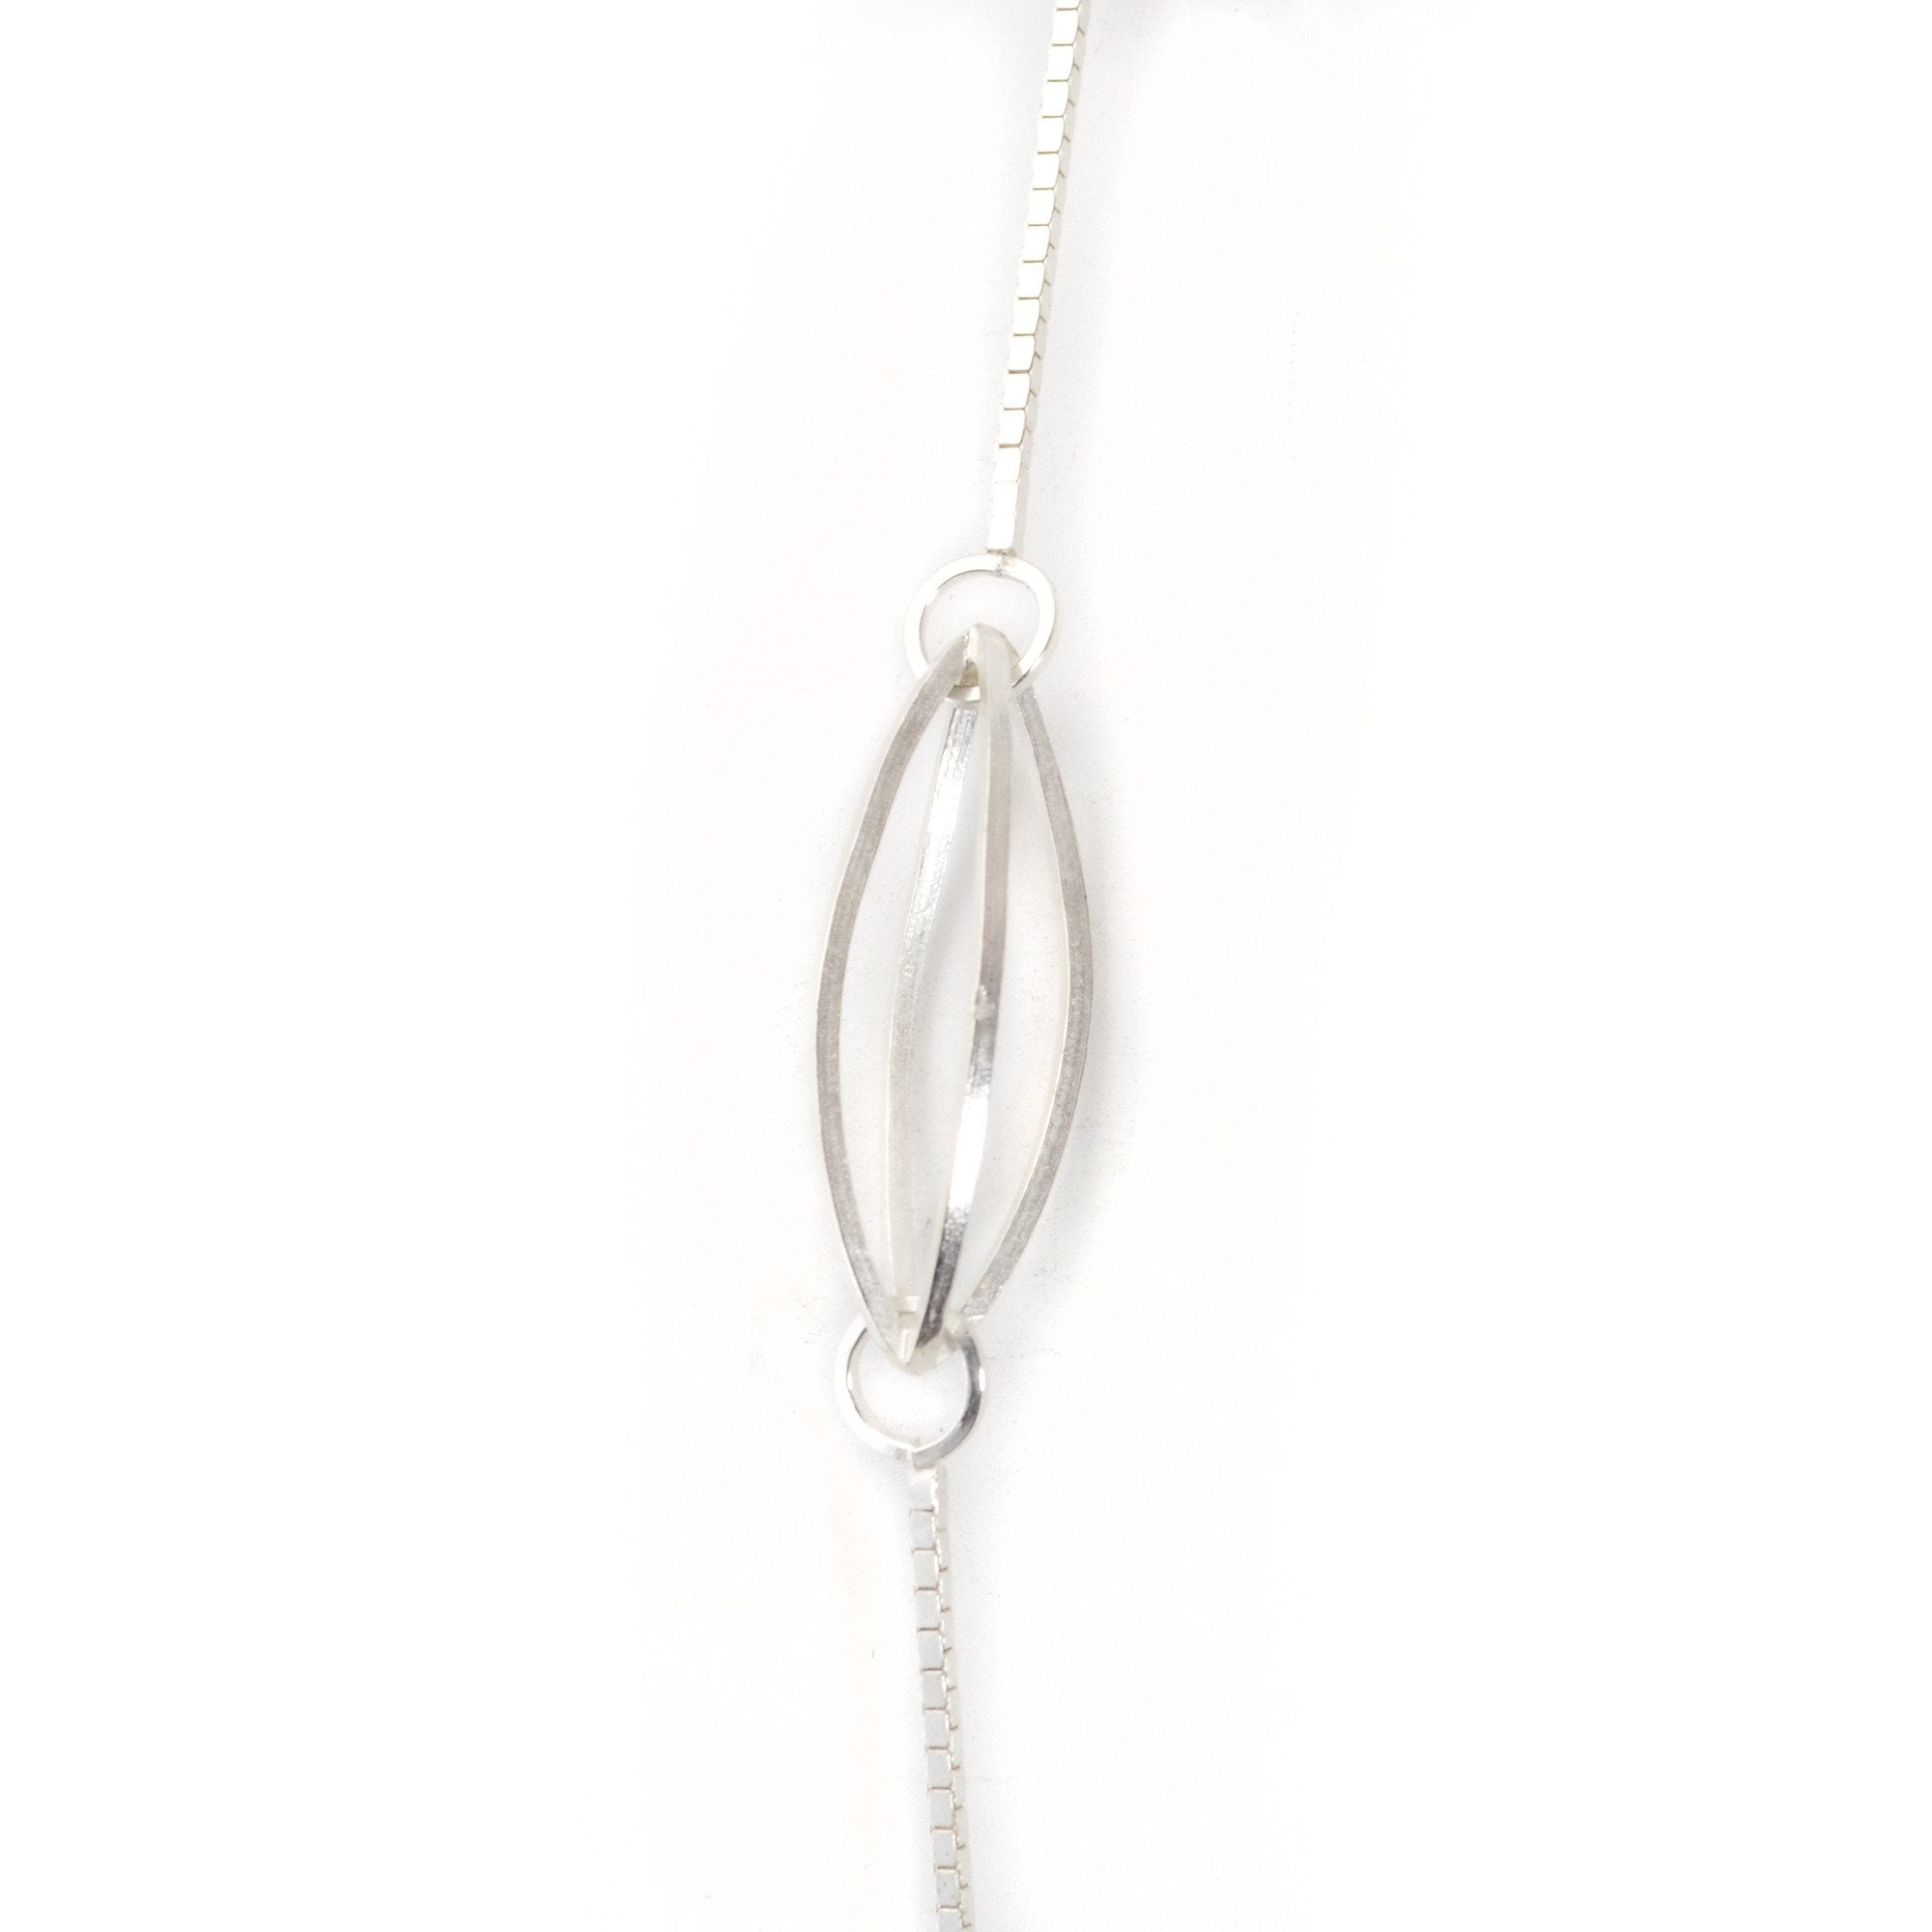 Streamline Lattis Shapes form a Minimal Siloutte on this Long Necklace in Sterling Silver